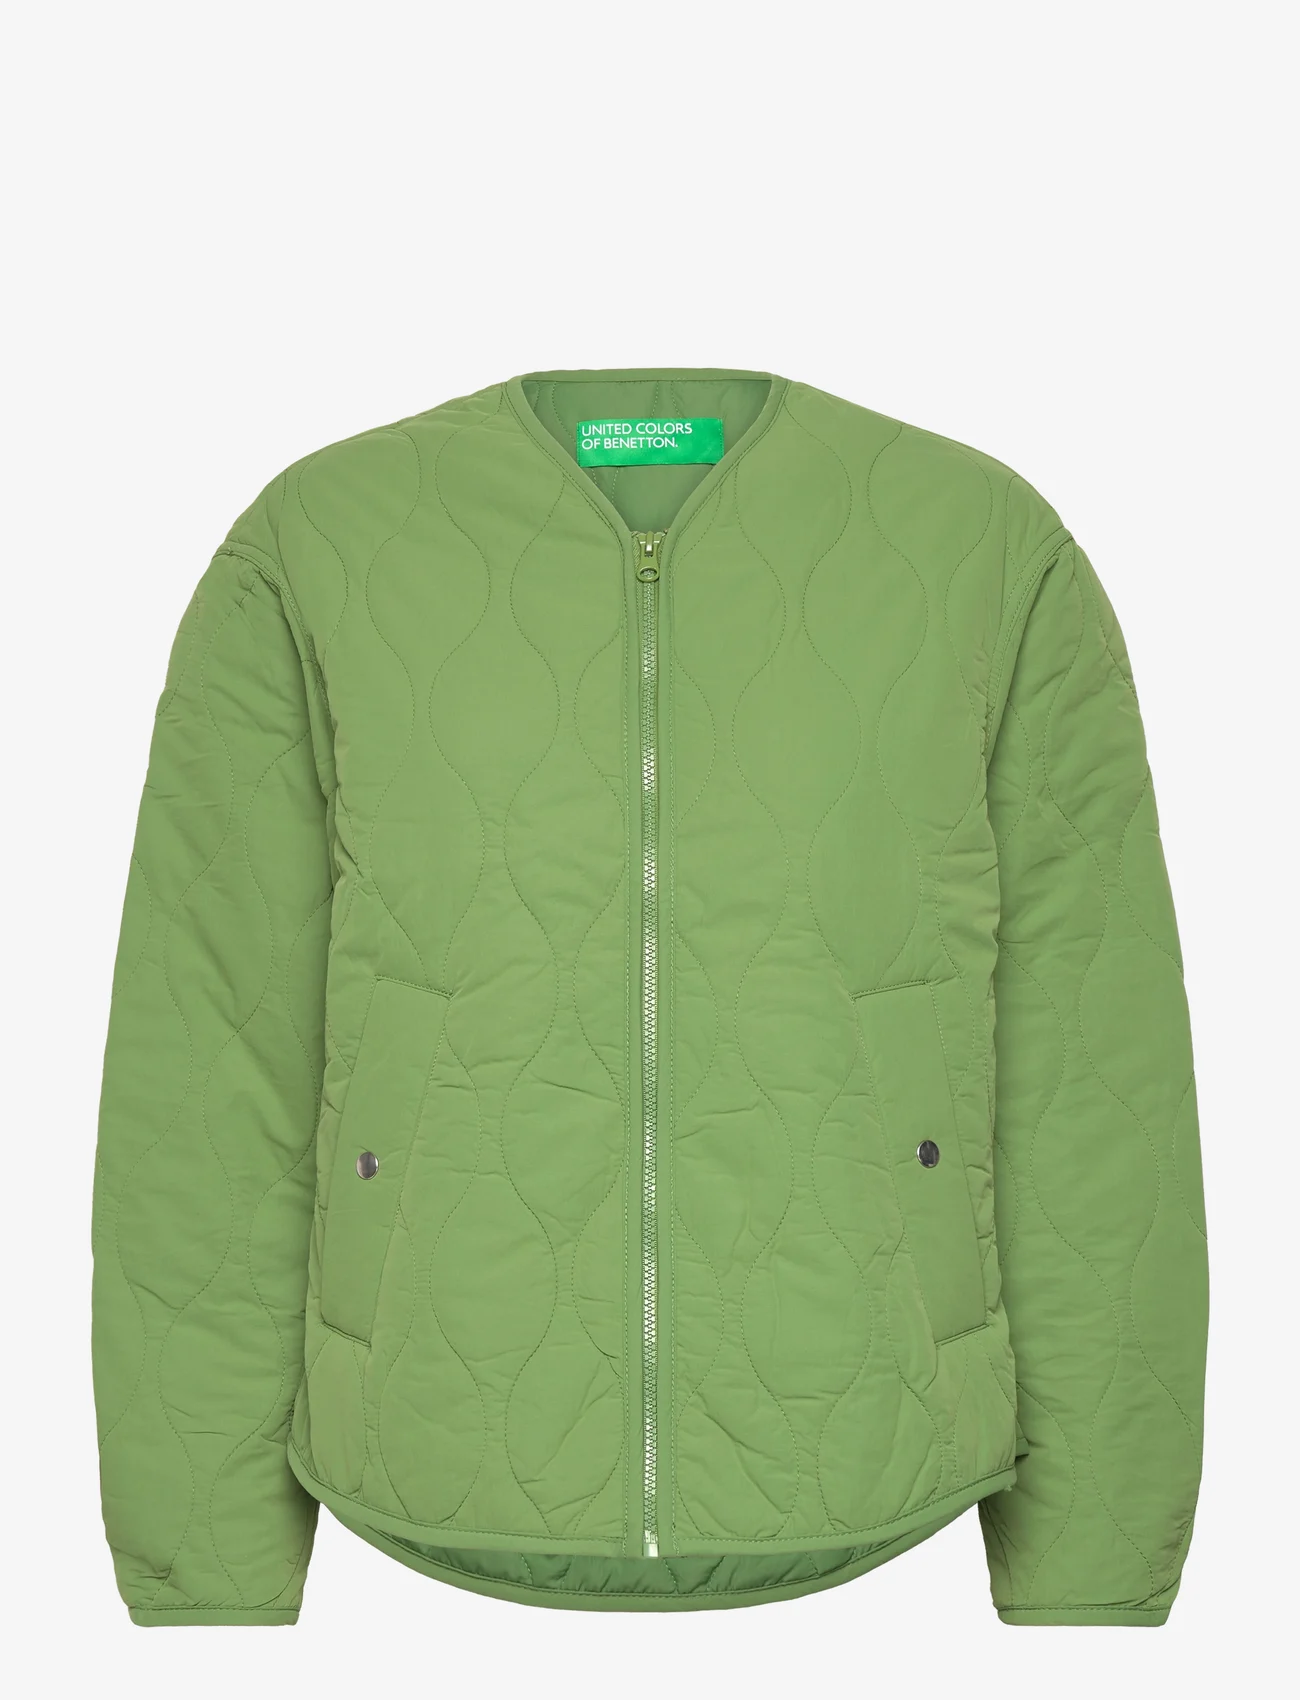 United Colors of Benetton - JACKET - quiltade jackor - green - 0